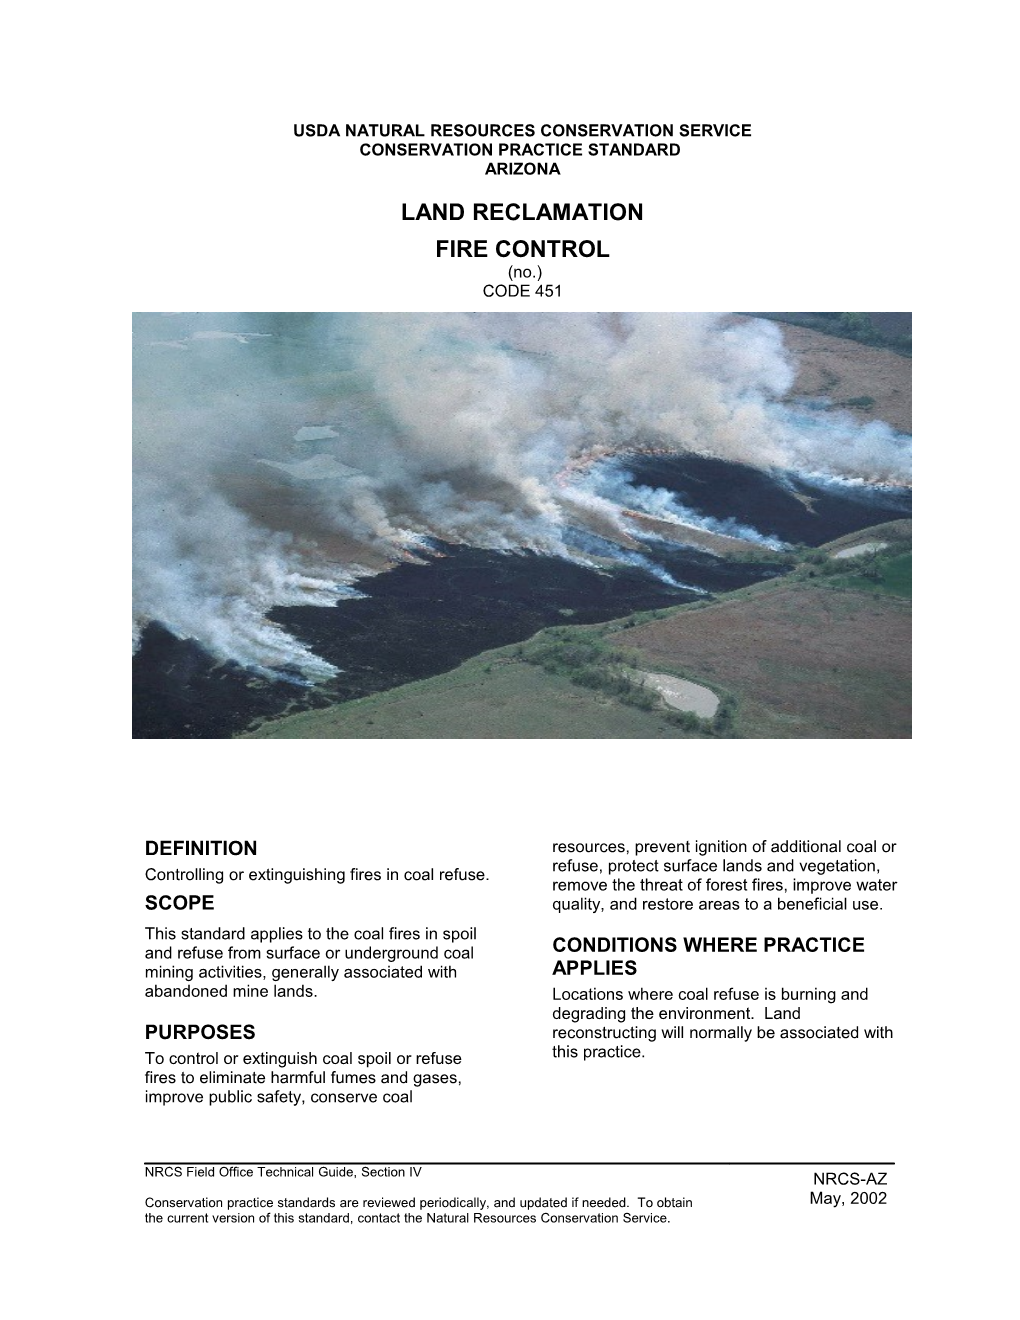 Land Reclamation, Fire Control 451